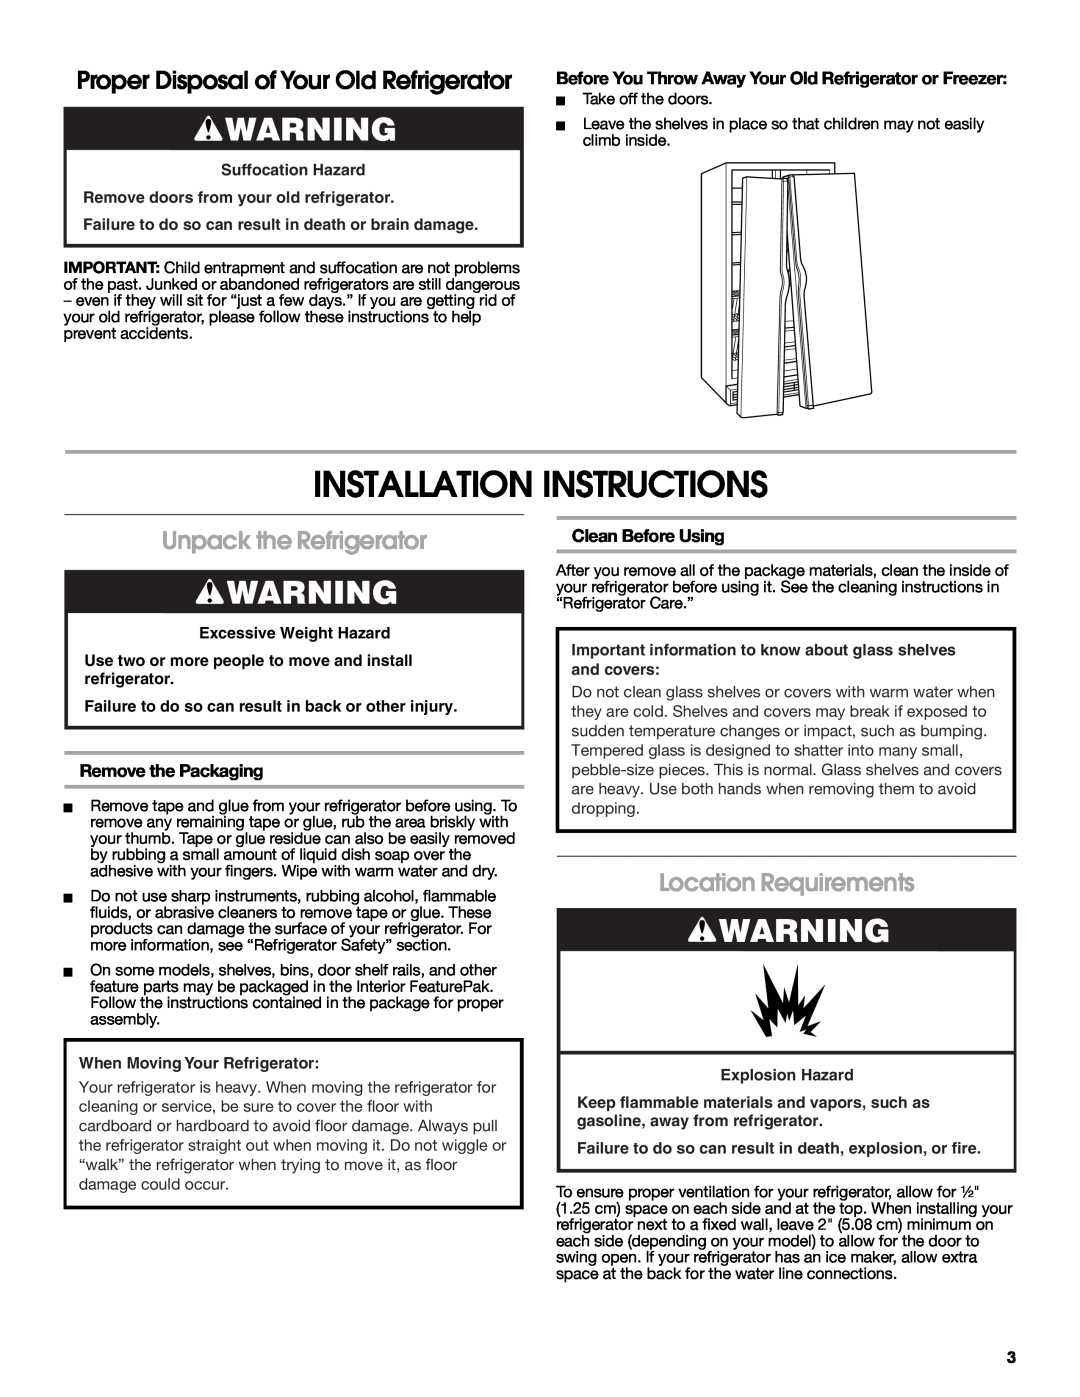 Whirlpool W10266784A manual Installation Instructions, Proper Disposal of Your Old Refrigerator, Unpack the Refrigerator 